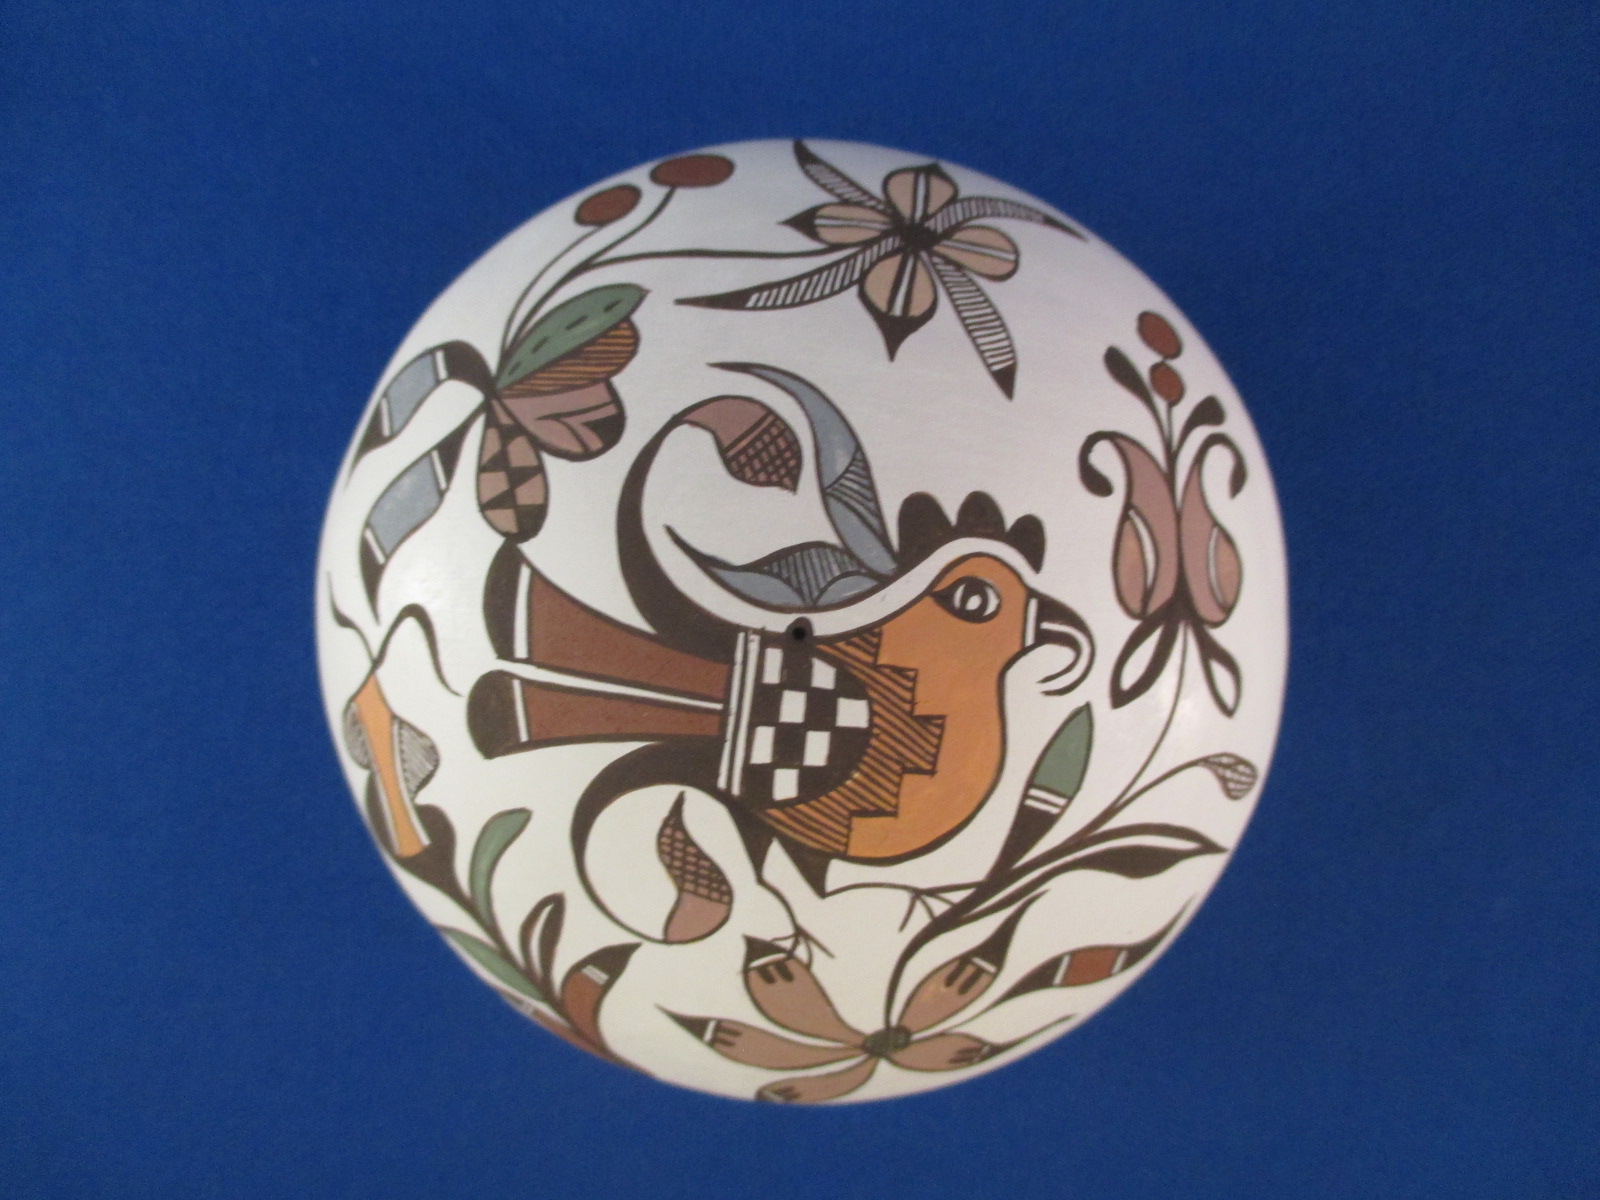 Acoma Seed Pot with Bird & Flowers by Acoma Pueblo Indian pottery artist, Diane Lewis-Garcia $250-